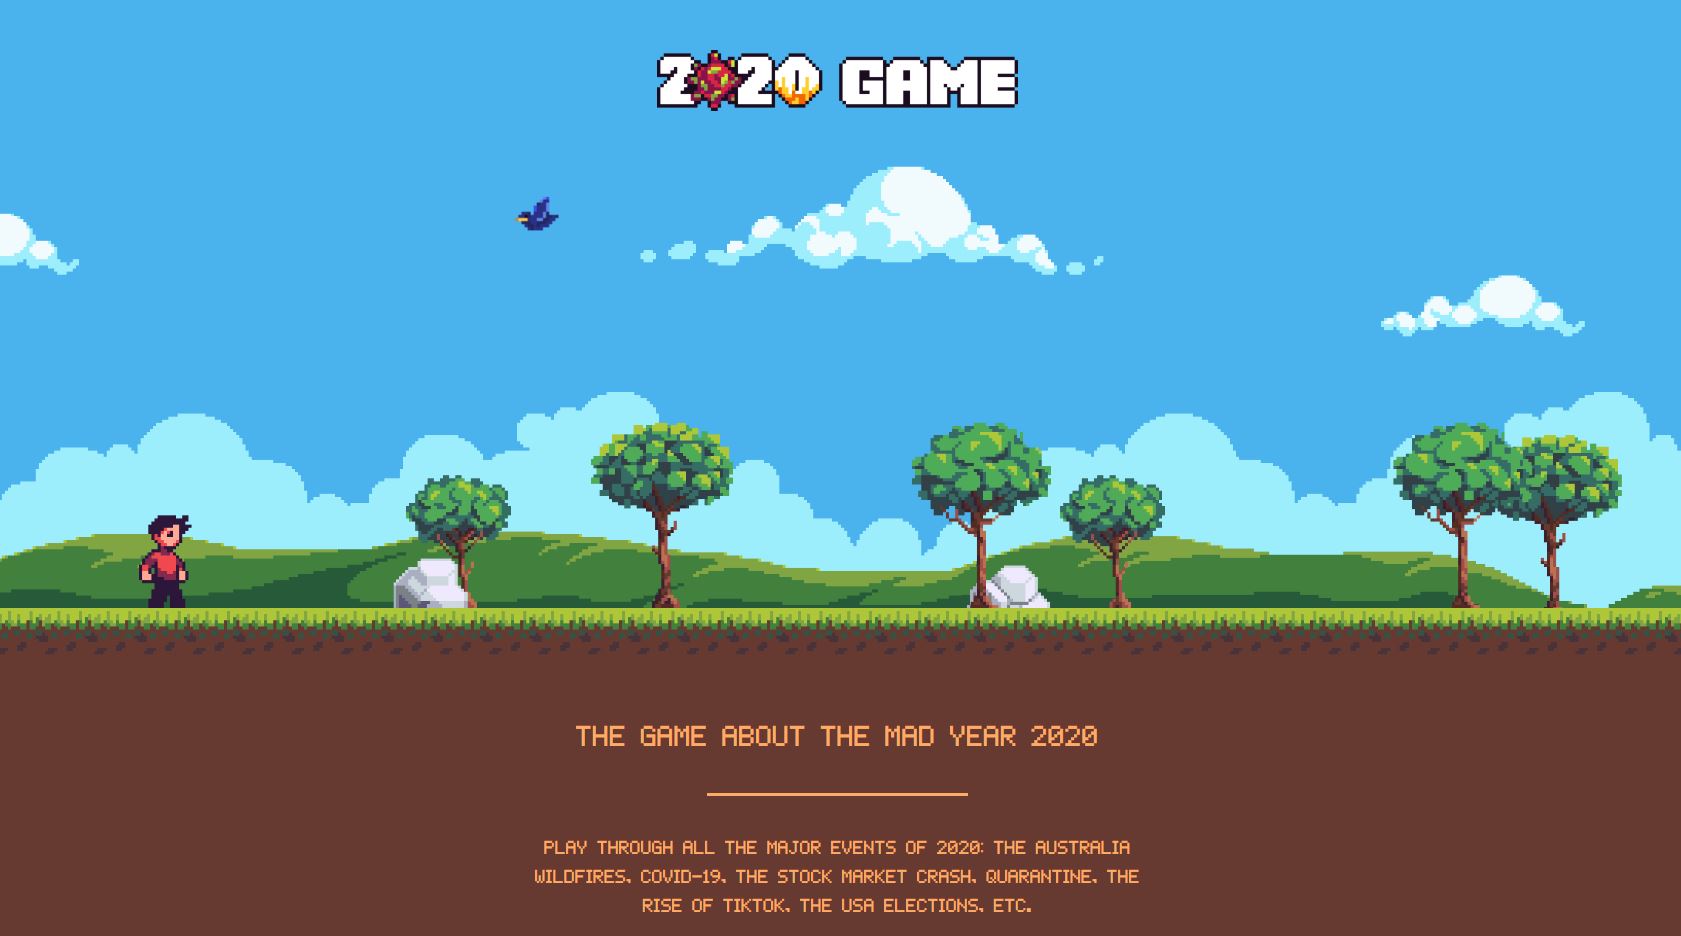 2020 Game: A Game that Will Take You Back to a Mad Year